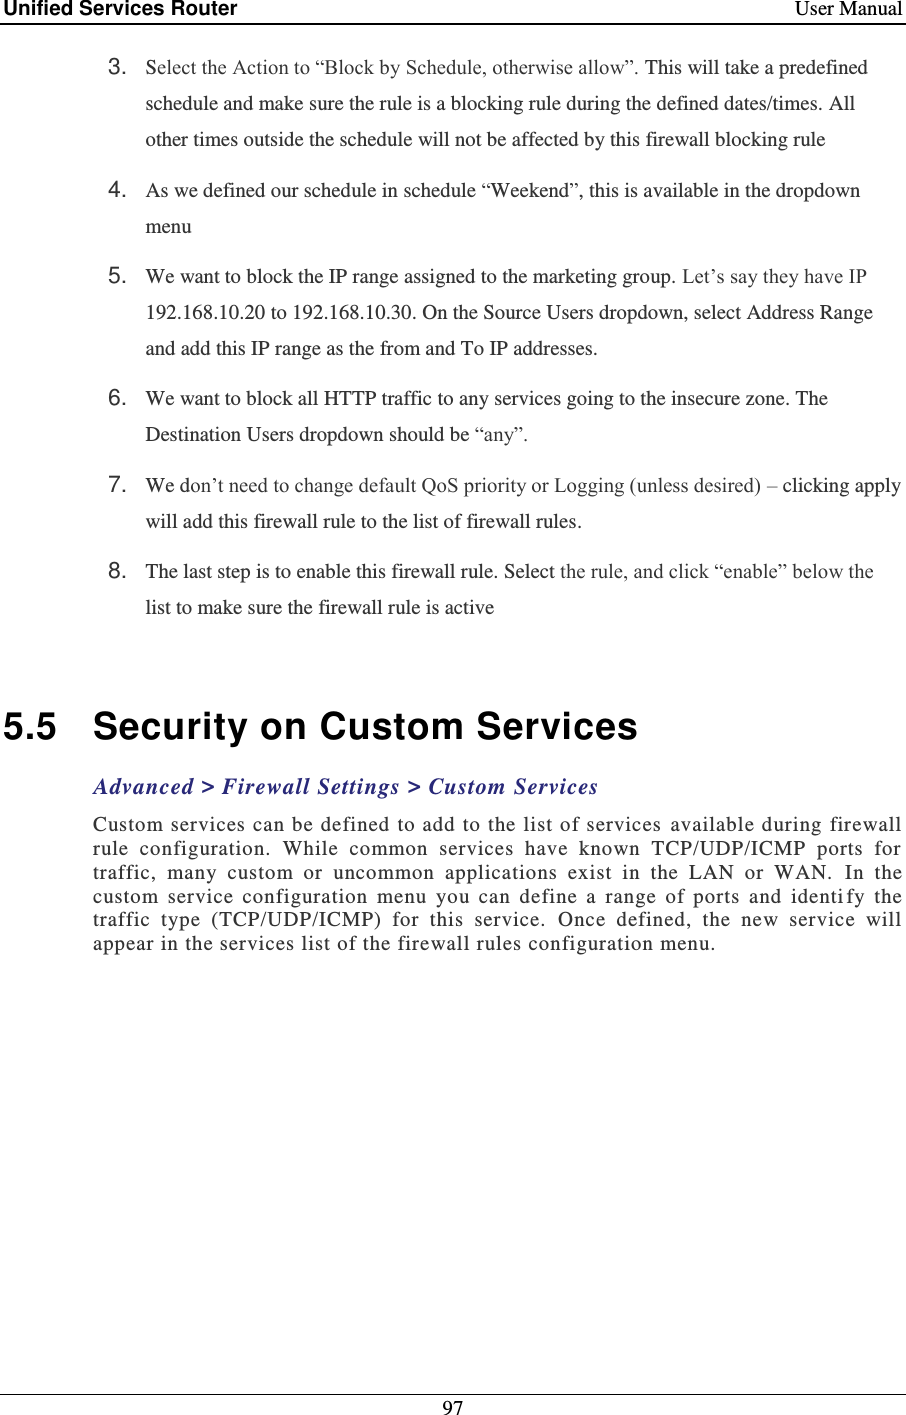 Unified Services Router    User Manual 97  3. Select the Action to “Block by Schedule, otherwise allow”. This will take a predefined schedule and make sure the rule is a blocking rule during the defined dates/times. All other times outside the schedule will not be affected by this firewall blocking rule 4. As we defined our schedule in schedule “Weekend”, this is available in the dropdown menu  5. We want to block the IP range assigned to the marketing group. Let’s say they have IP 192.168.10.20 to 192.168.10.30. On the Source Users dropdown, select Address Range and add this IP range as the from and To IP addresses.  6. We want to block all HTTP traffic to any services going to the insecure zone. The Destination Users dropdown should be “any”.  7. We don’t need to change default QoS priority or Logging (unless desired) – clicking apply will add this firewall rule to the list of firewall rules.  8. The last step is to enable this firewall rule. Select the rule, and click “enable” below the list to make sure the firewall rule is active  5.5  Security on Custom Services Advanced &gt; Firewall Settings &gt; Custom Services Custom services can be defined to add to the list of  services  available during firewall rule  configuration.  While  common  services  have  known  TCP/UDP/ICMP  ports  for traffic,  many  custom  or  uncommon  applications  exist  in  the  LAN  or  WAN.   In  the custom  service  configuration  menu  you  can  define  a  range  of  ports  and  identi fy  the traffic  type  (TCP/UDP/ICMP)  for  this  service.   Once  defined,  the  new  service  will appear in the services list of the firewall rules configuration menu.    